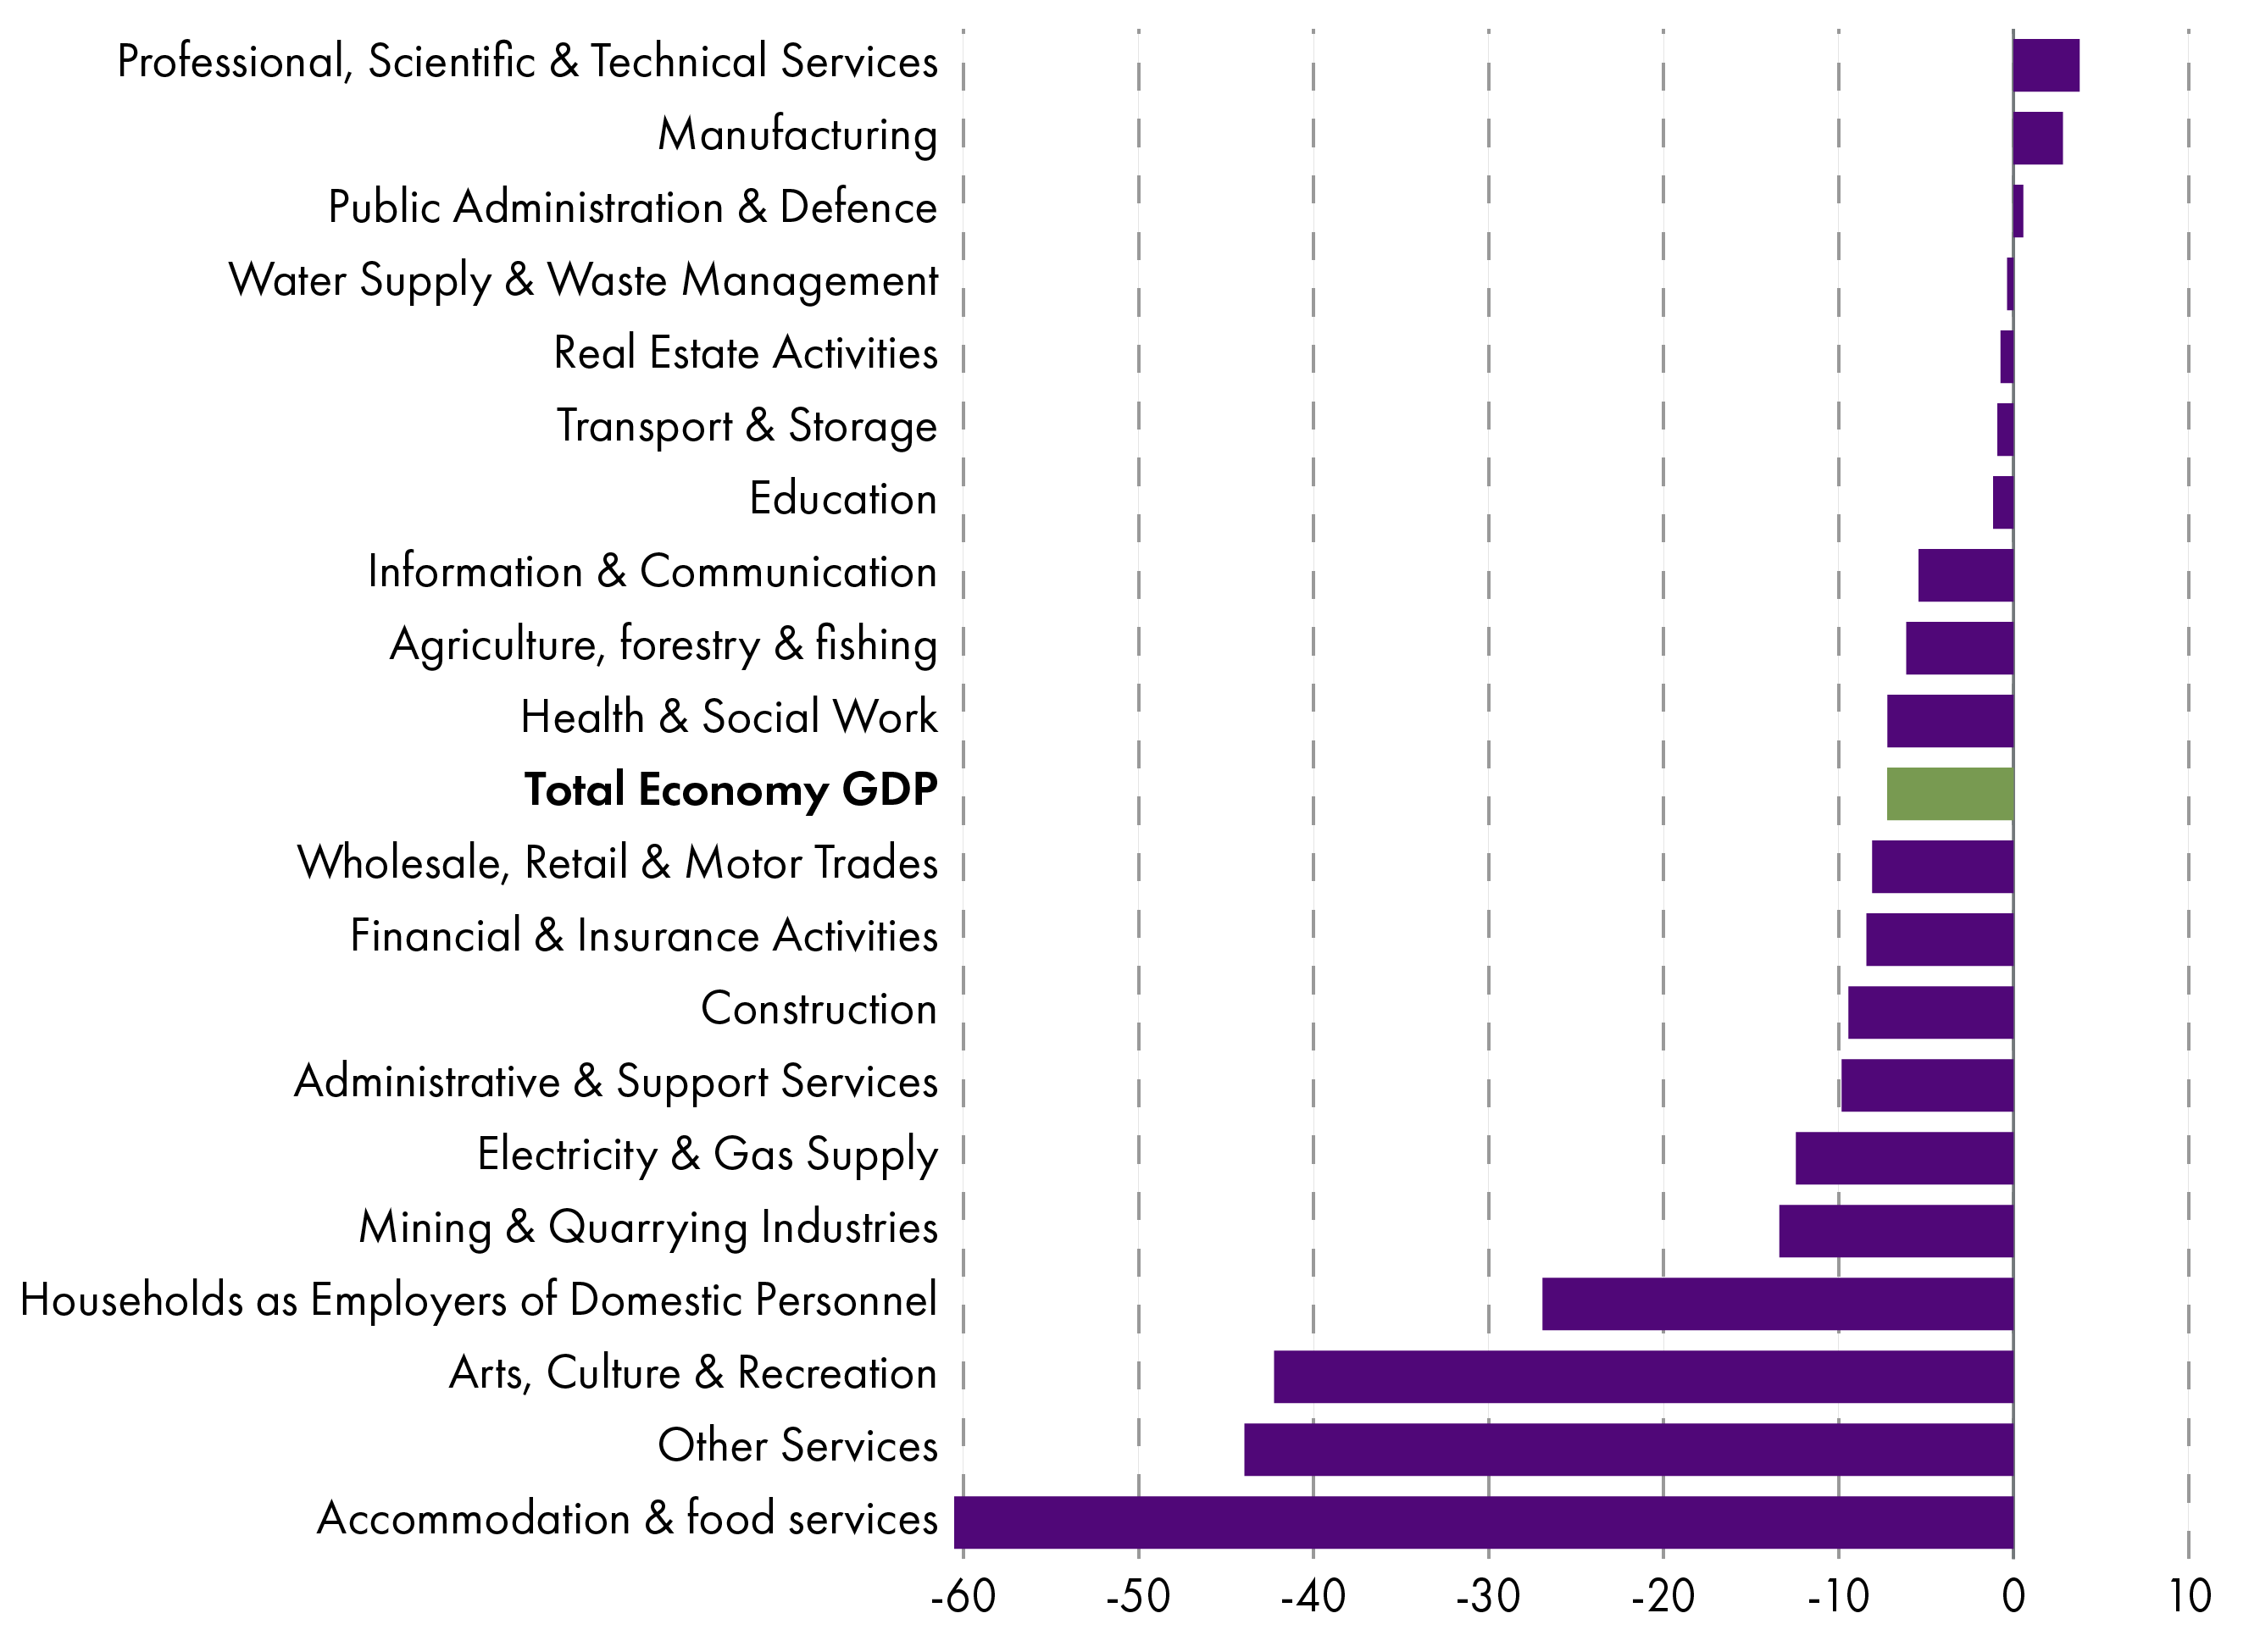 While the whole economy is 7.2% below February 2020 levels of GDP, not all sectors have been impacted equally, as shown in the chart below. Accommodation & food services is by far the worst impacted sector, recording GDP levels over 60% below February 2020 levels in December 2020